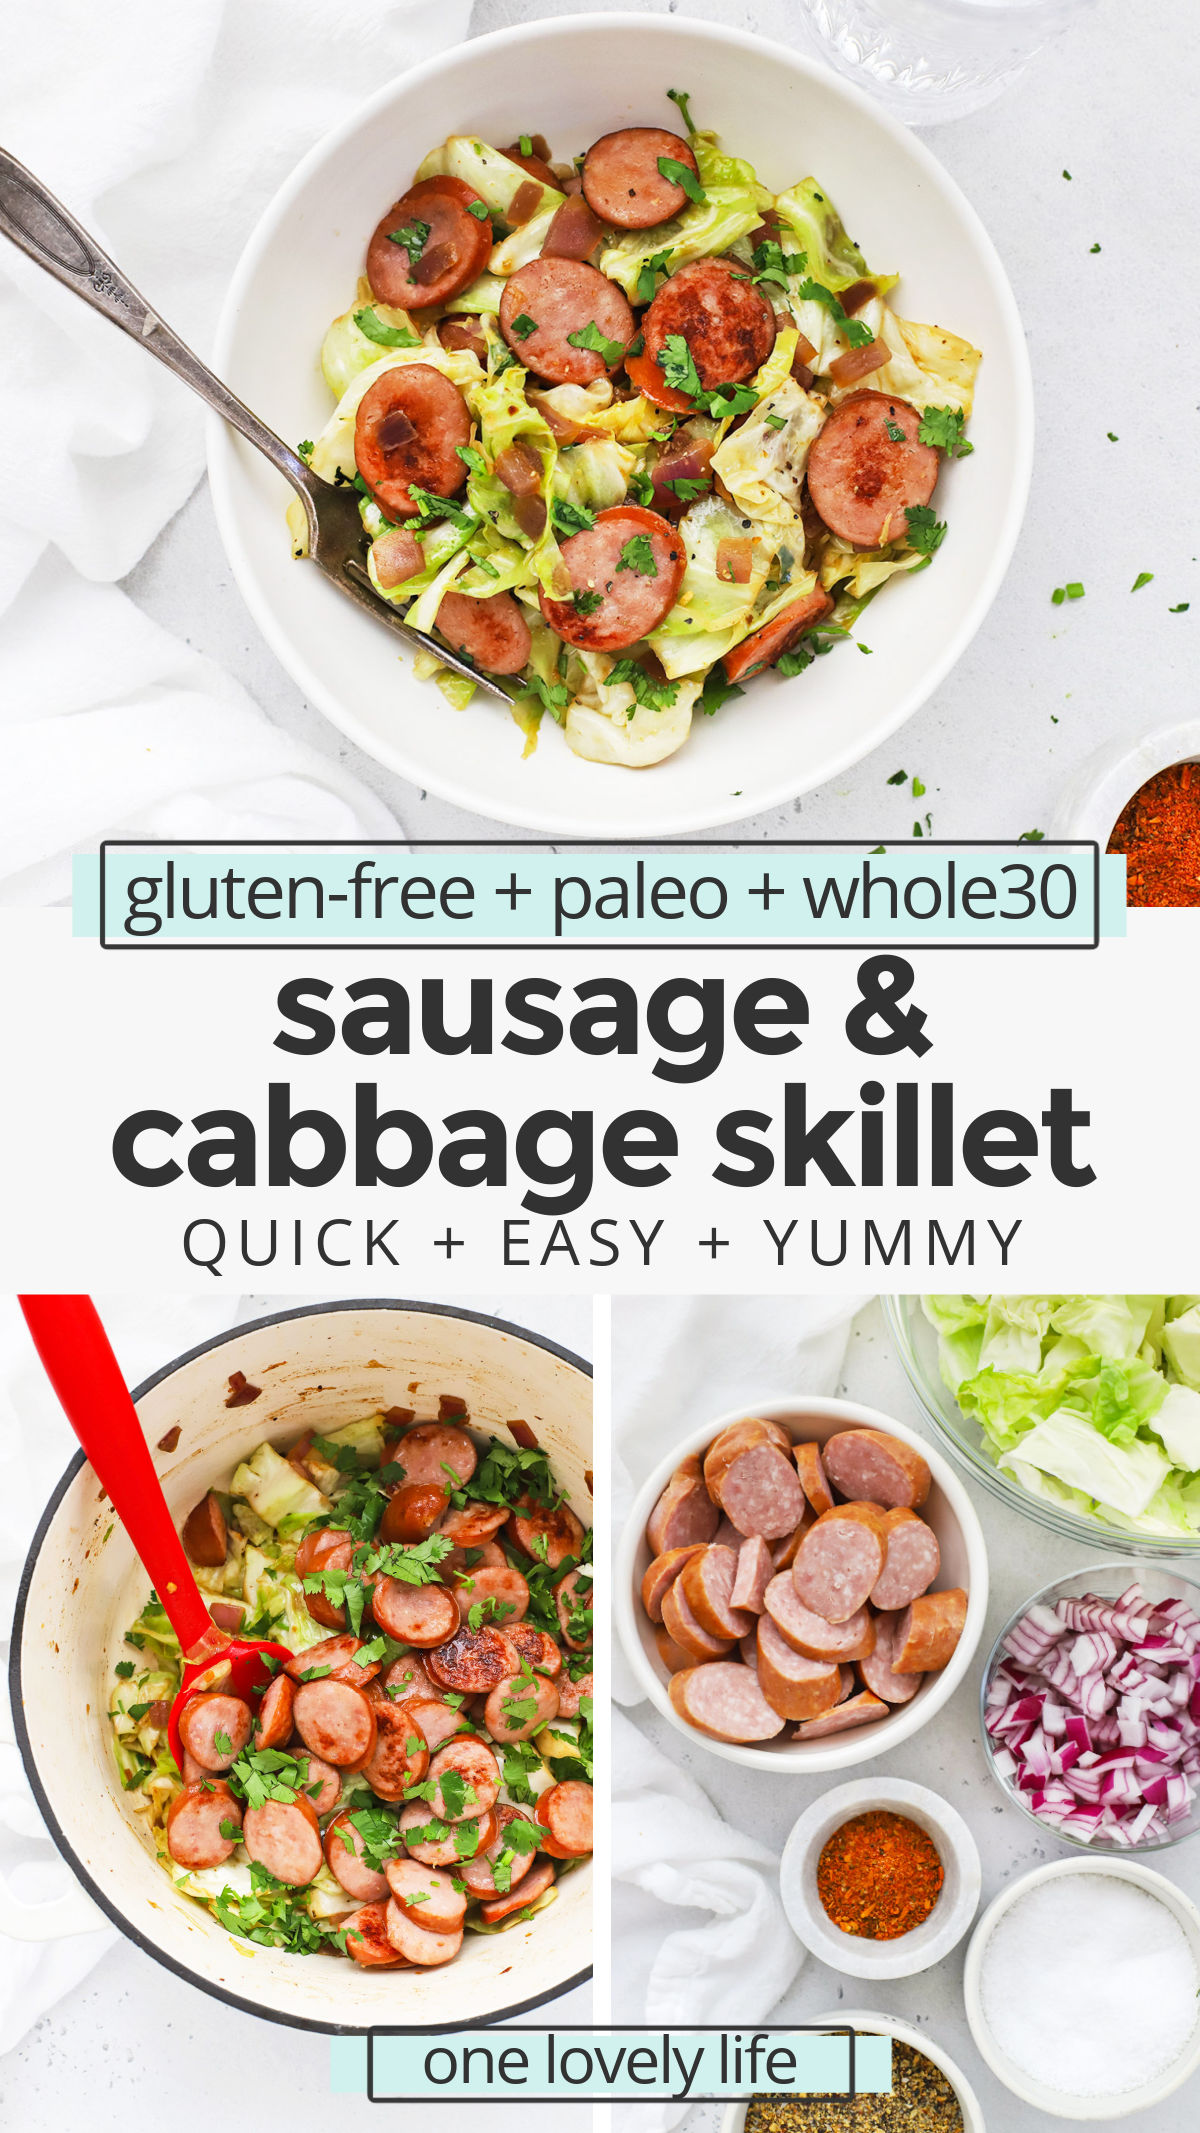 Easy Sausage & Cabbage Skillet - This easy one pan dinner is done in a flash. Try the original or one of our flavor variations for even more ideas! (Gluten-Free, Paleo, Whole30) // Paleo Dinner // Whole30 Dinner // Low Carb Dinner // Skillet Dinner // Easy Dinner // Quick Dinner // Healthy Dinner